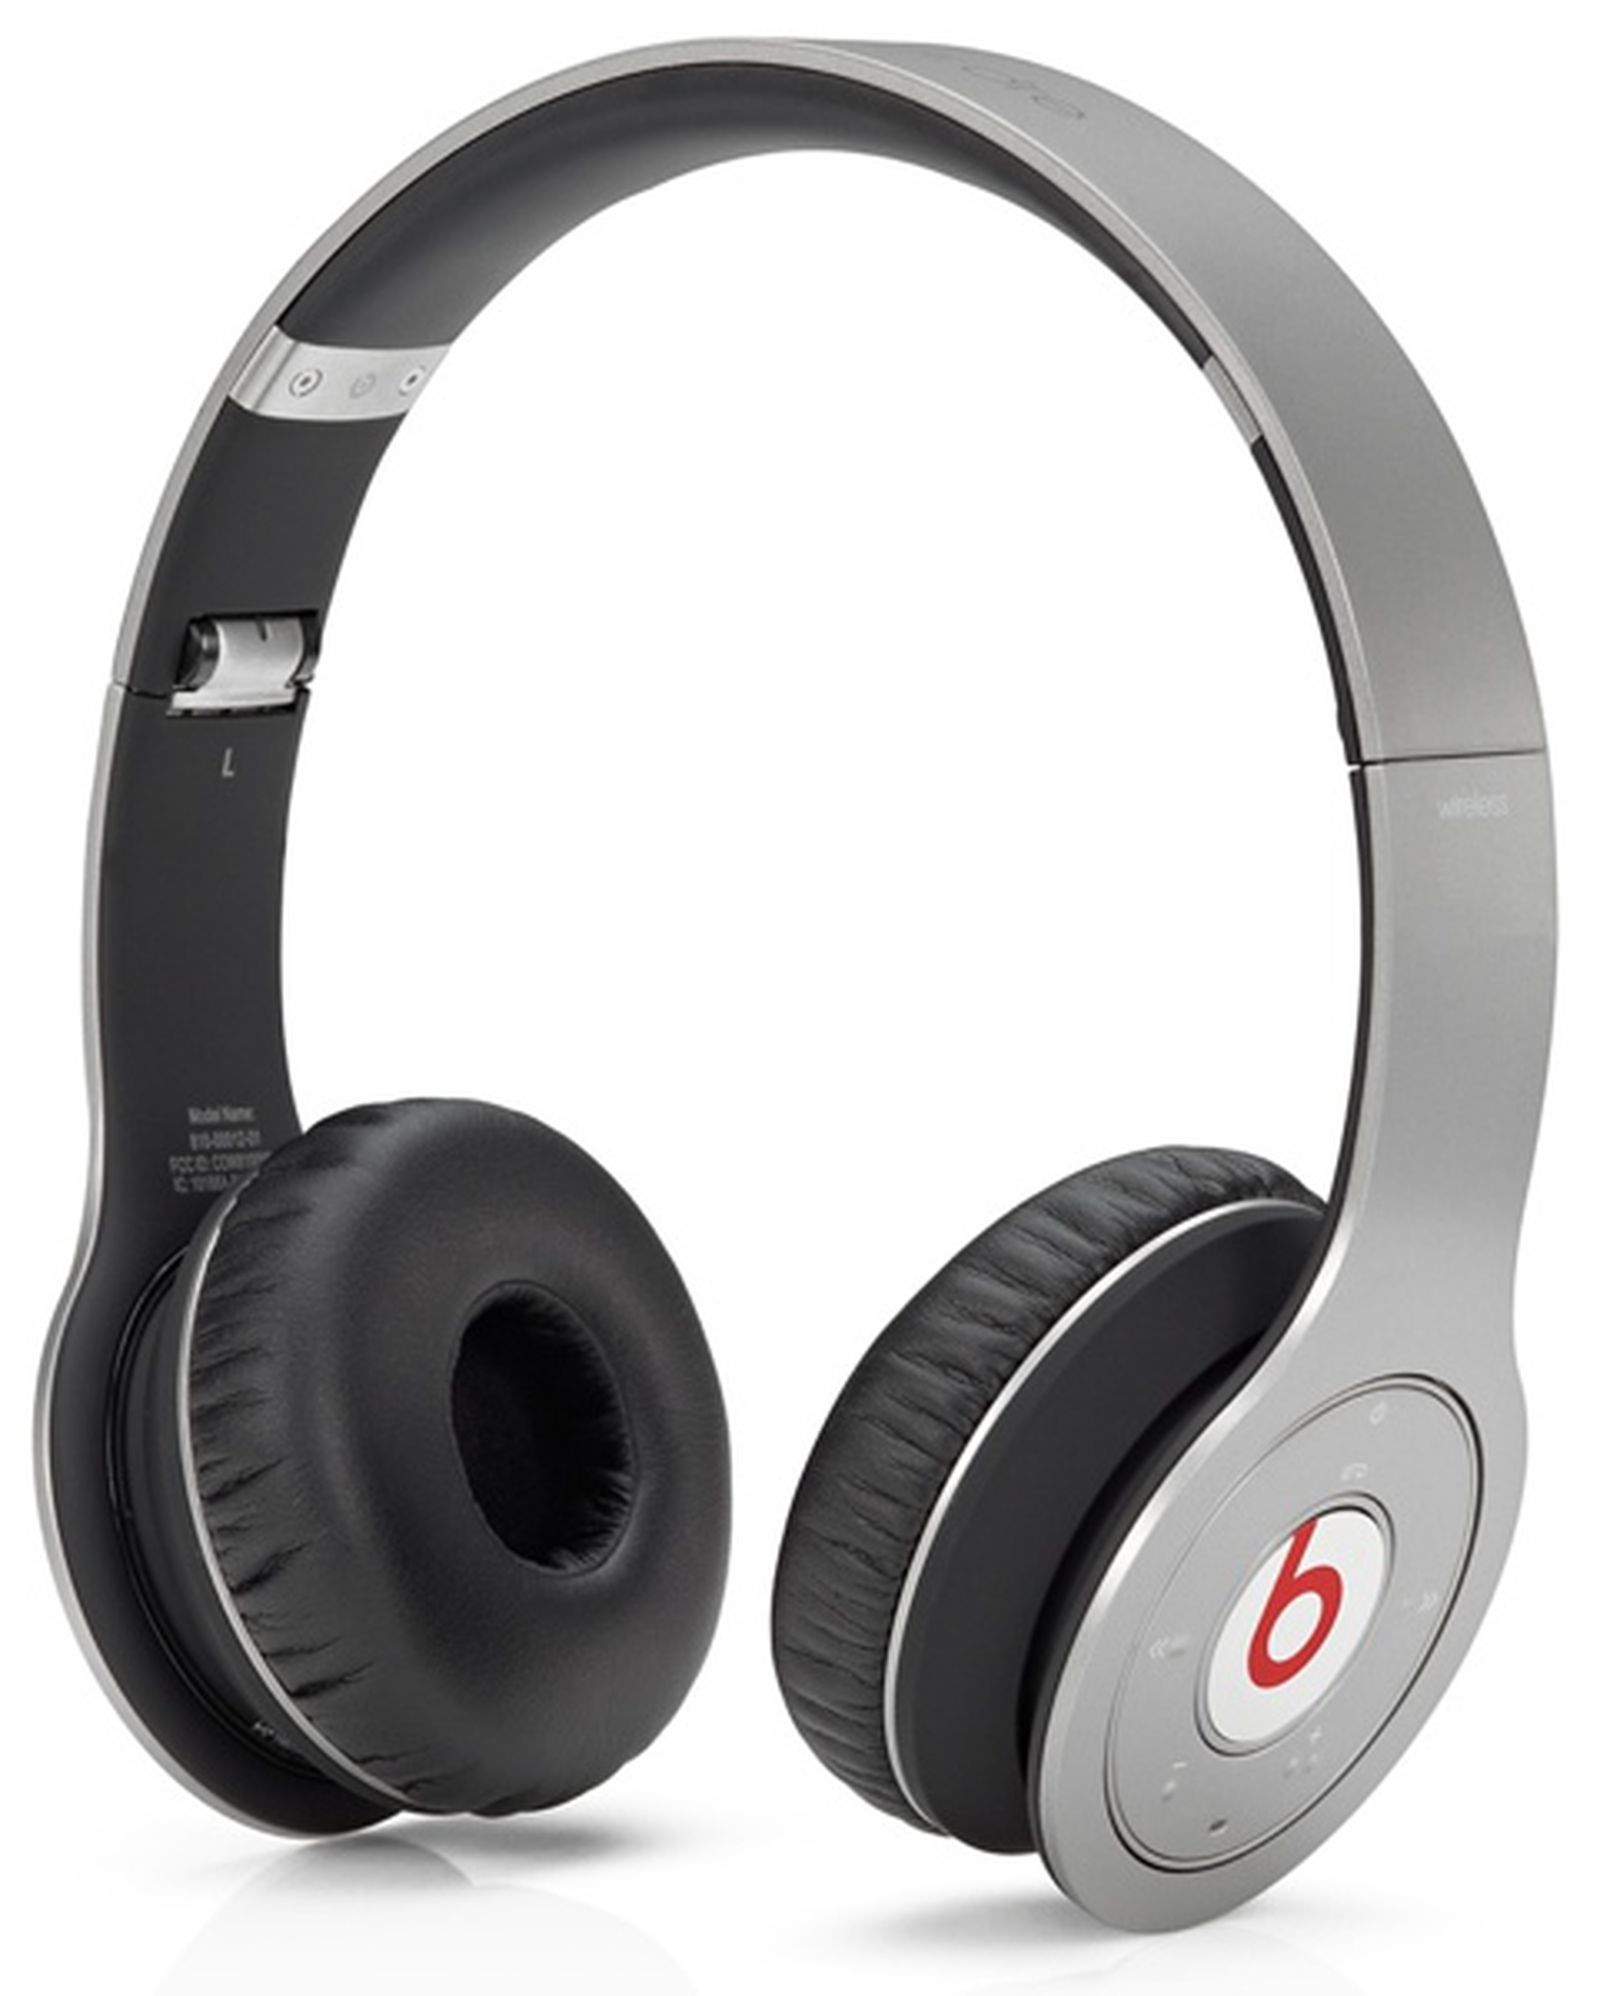 Apple in Talks to Acquire Beats for $3.2 [Updated] MacRumors